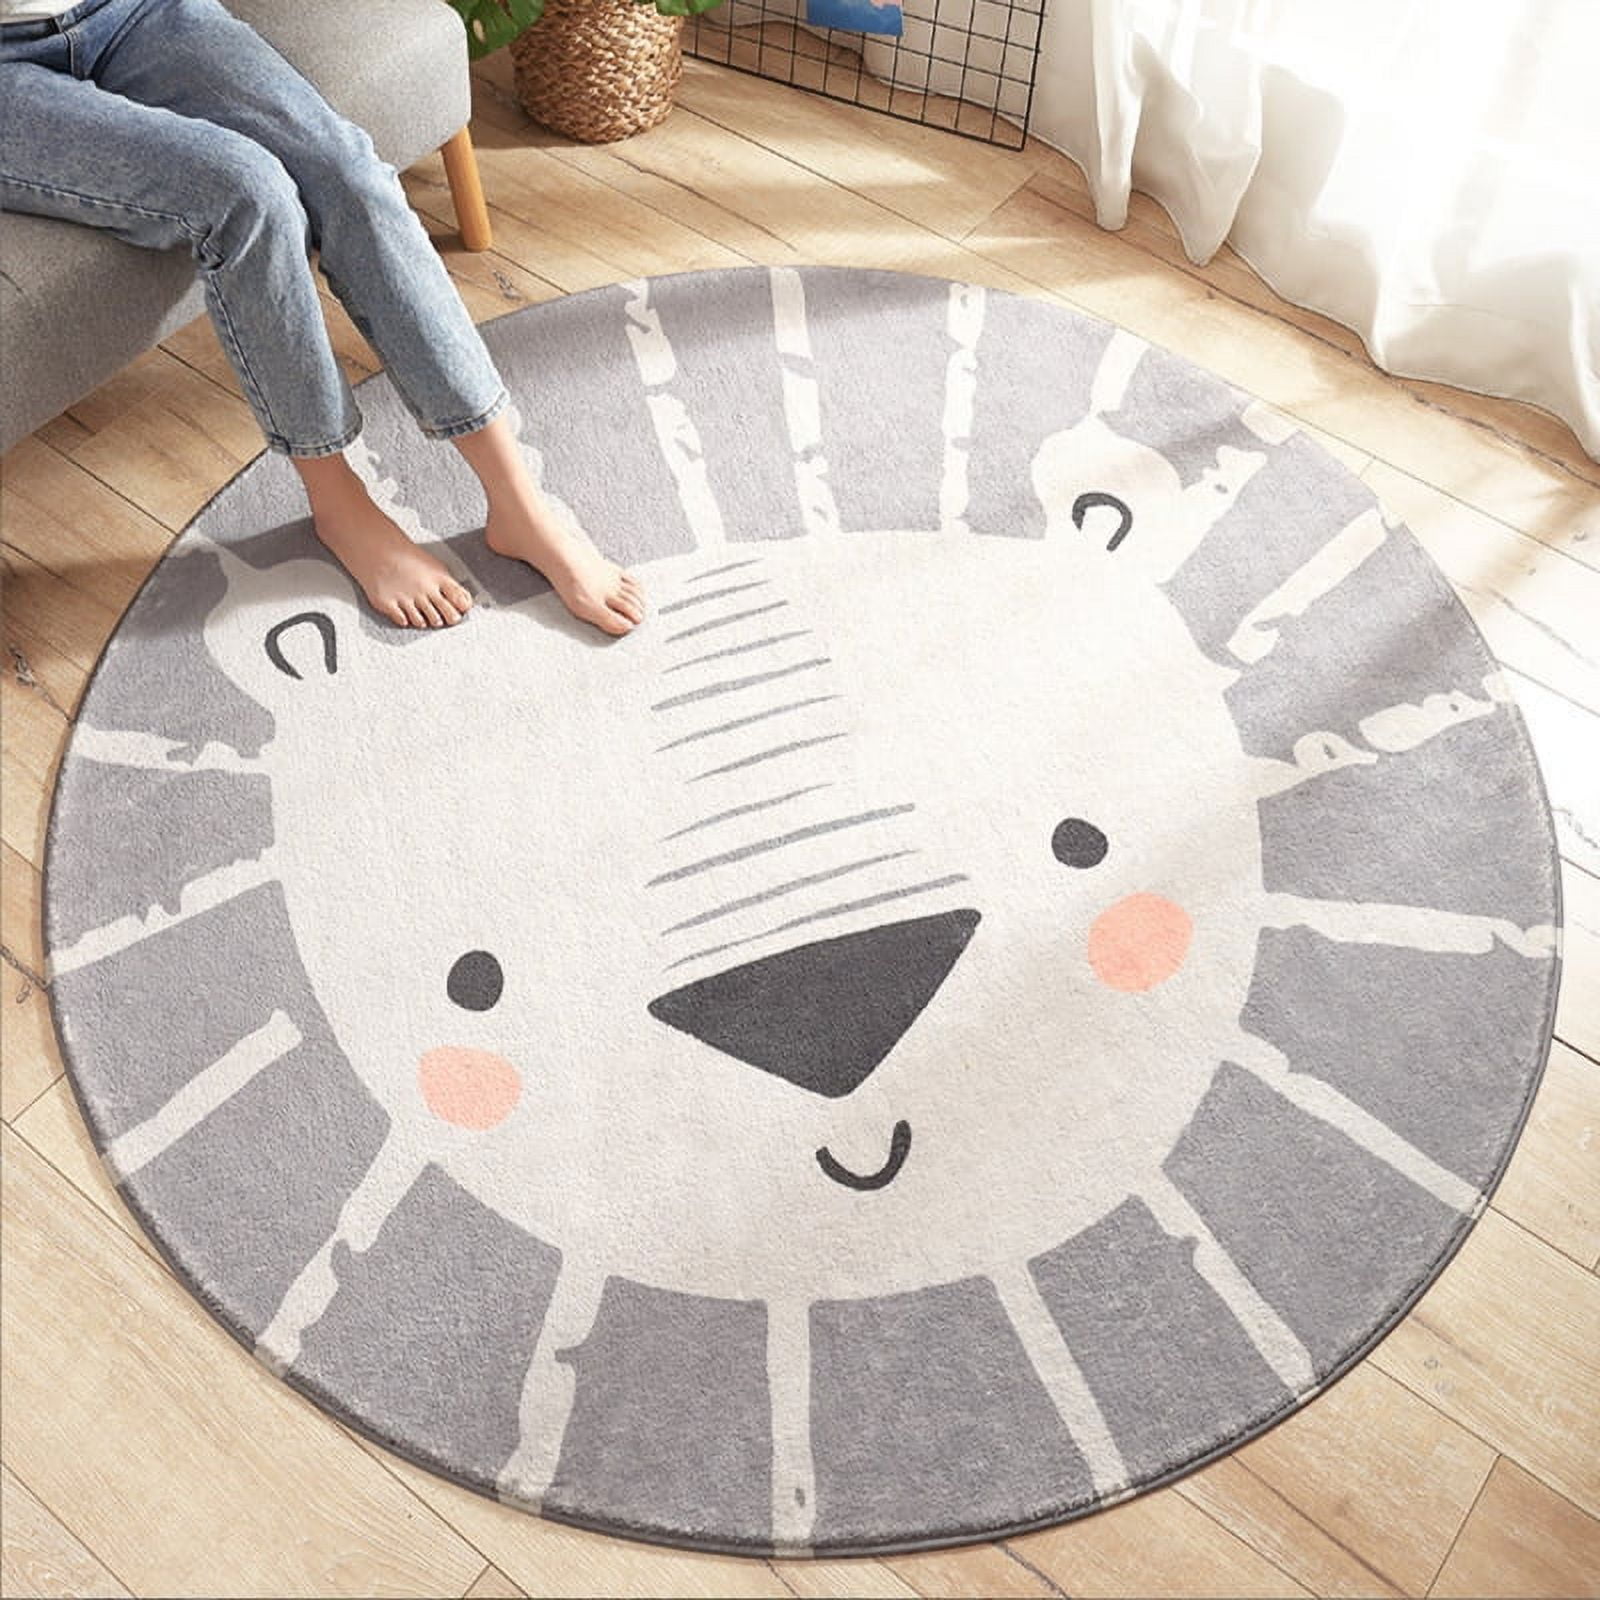 Yzrwebo Dog Shadow Round Rug 3 ft Sunset Dusk Soft Round Area Rug Floor  Mats Washable Non Slip Indoor Circle Rugs for Kids Room Living Room Sofa